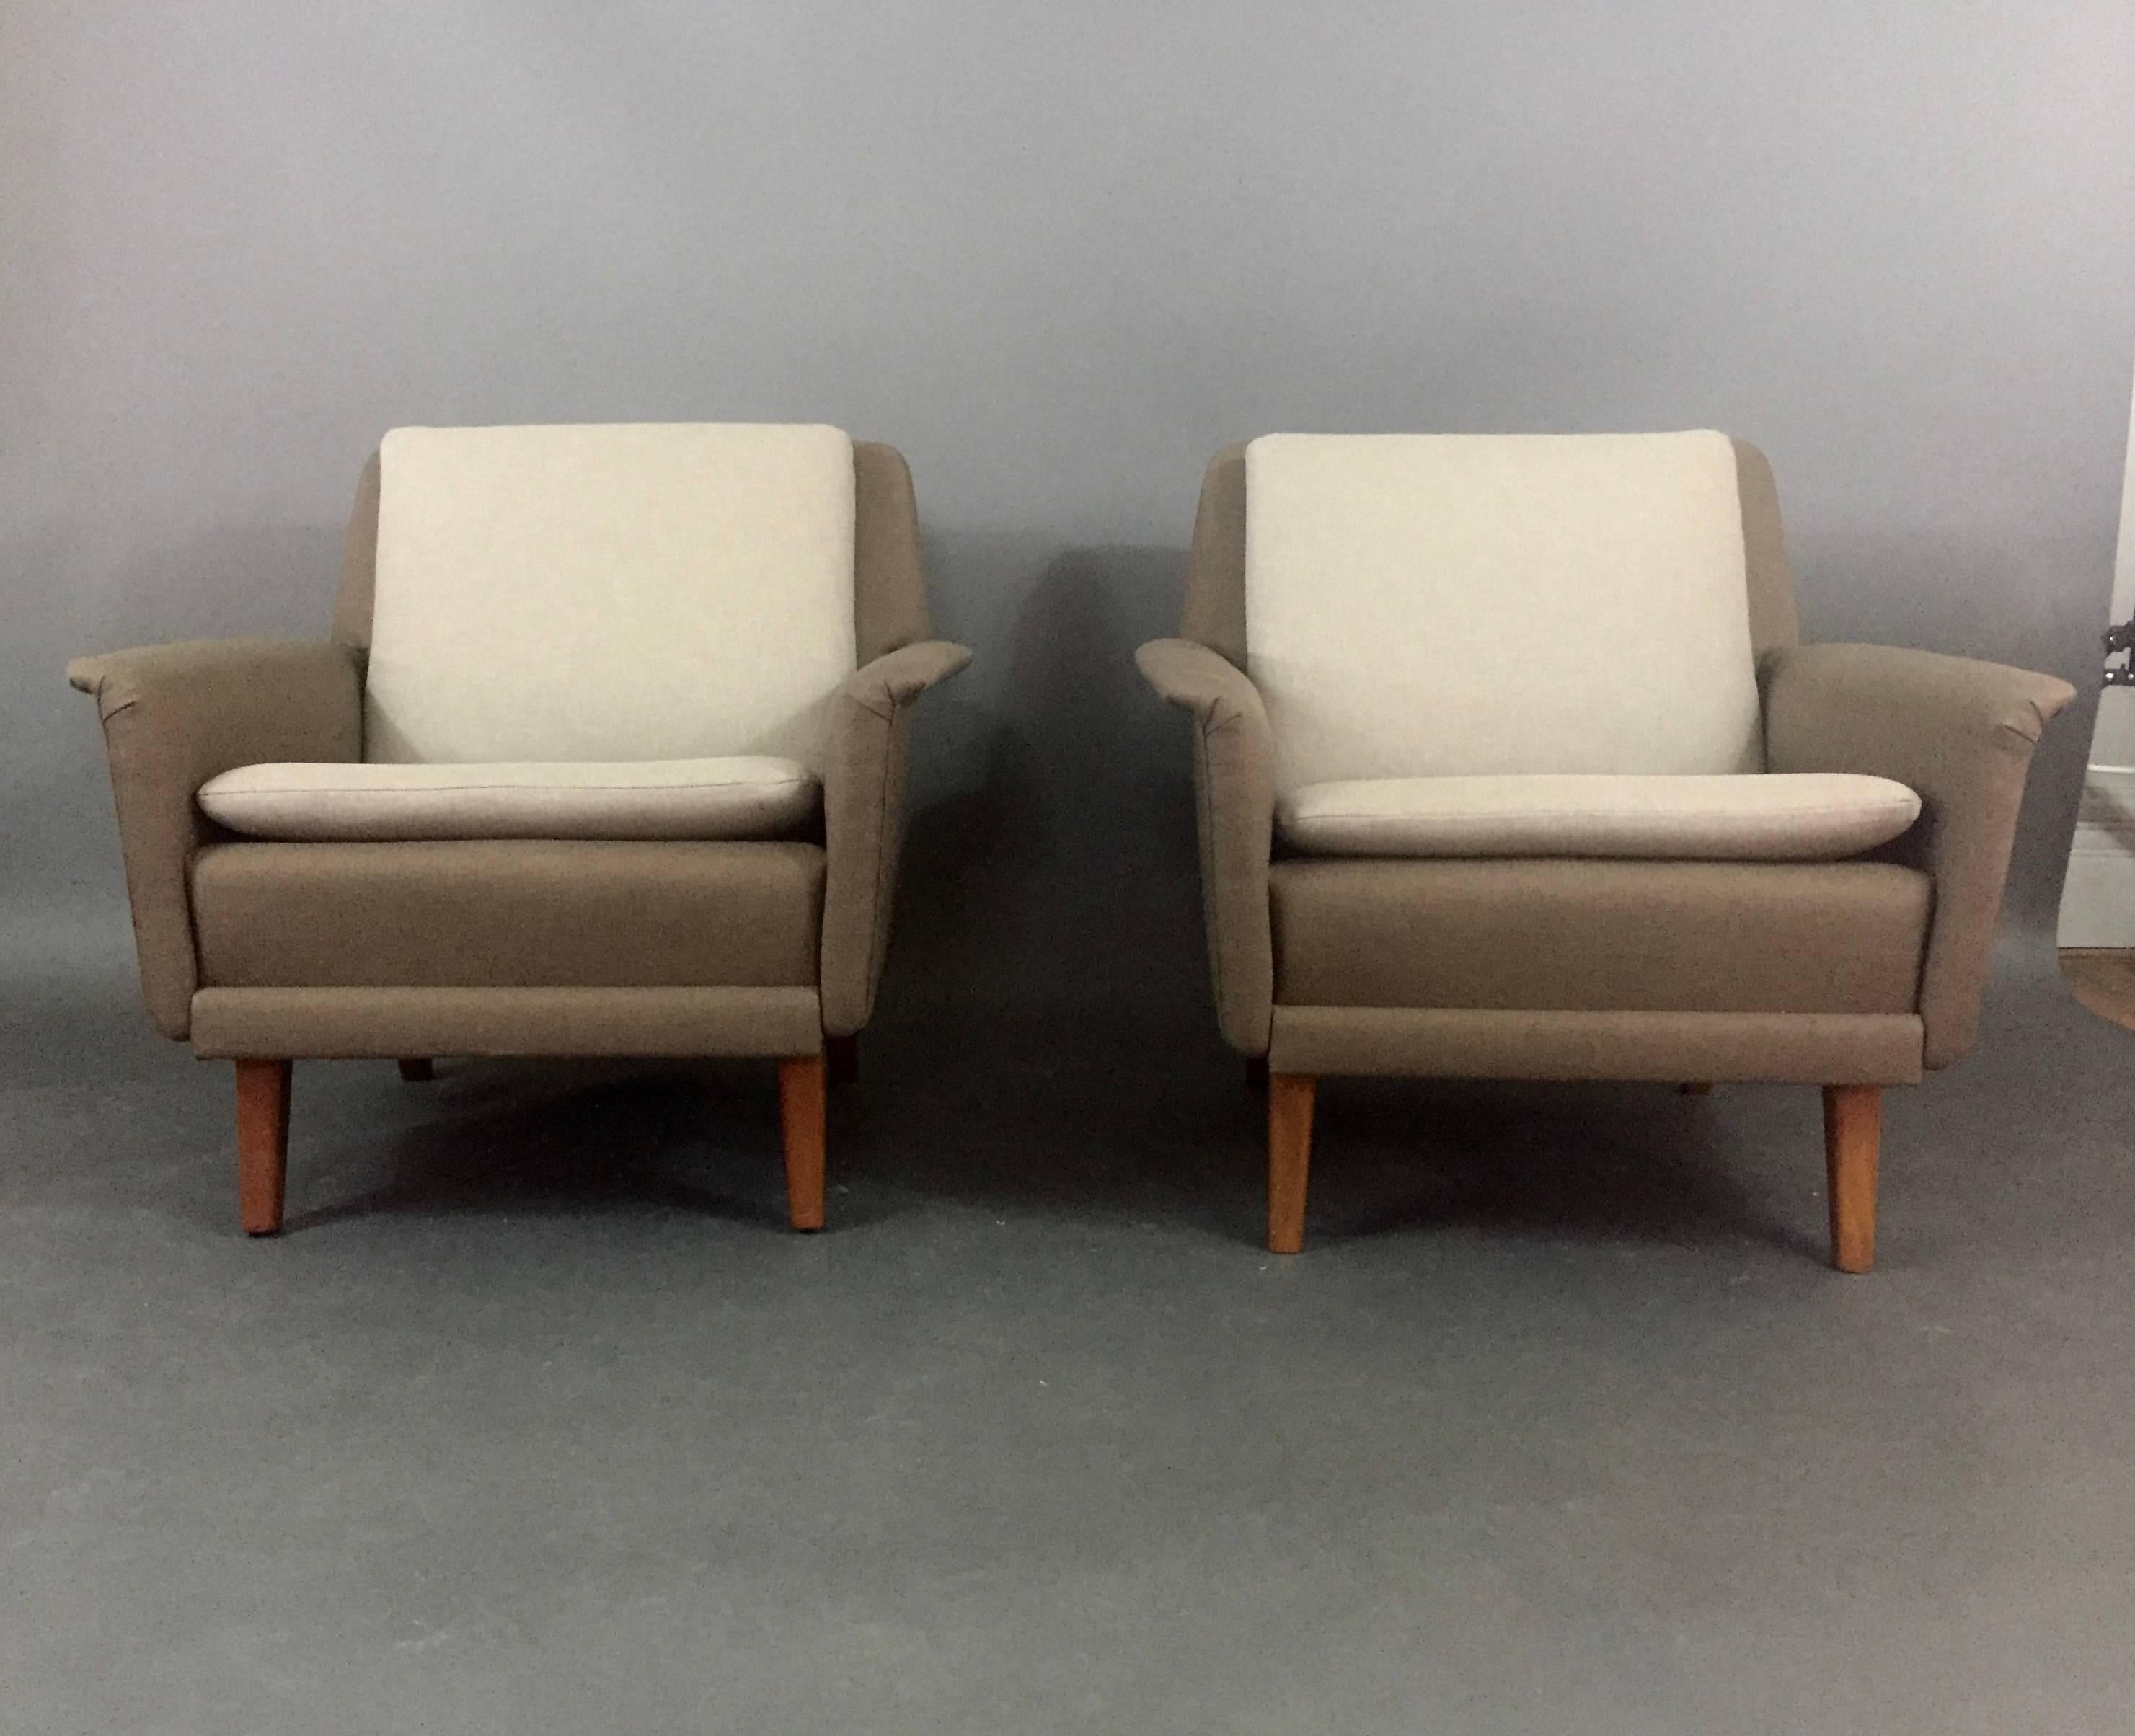 Pair of early 1960s lounge chairs by Folke Ohlsson of Swedish origin and creator of the American company DUX in 1953 to bring Scandinavian design to the US. This pair manufactured by Fritz Hanson, Denmark. The chairs have flared arms and two loose